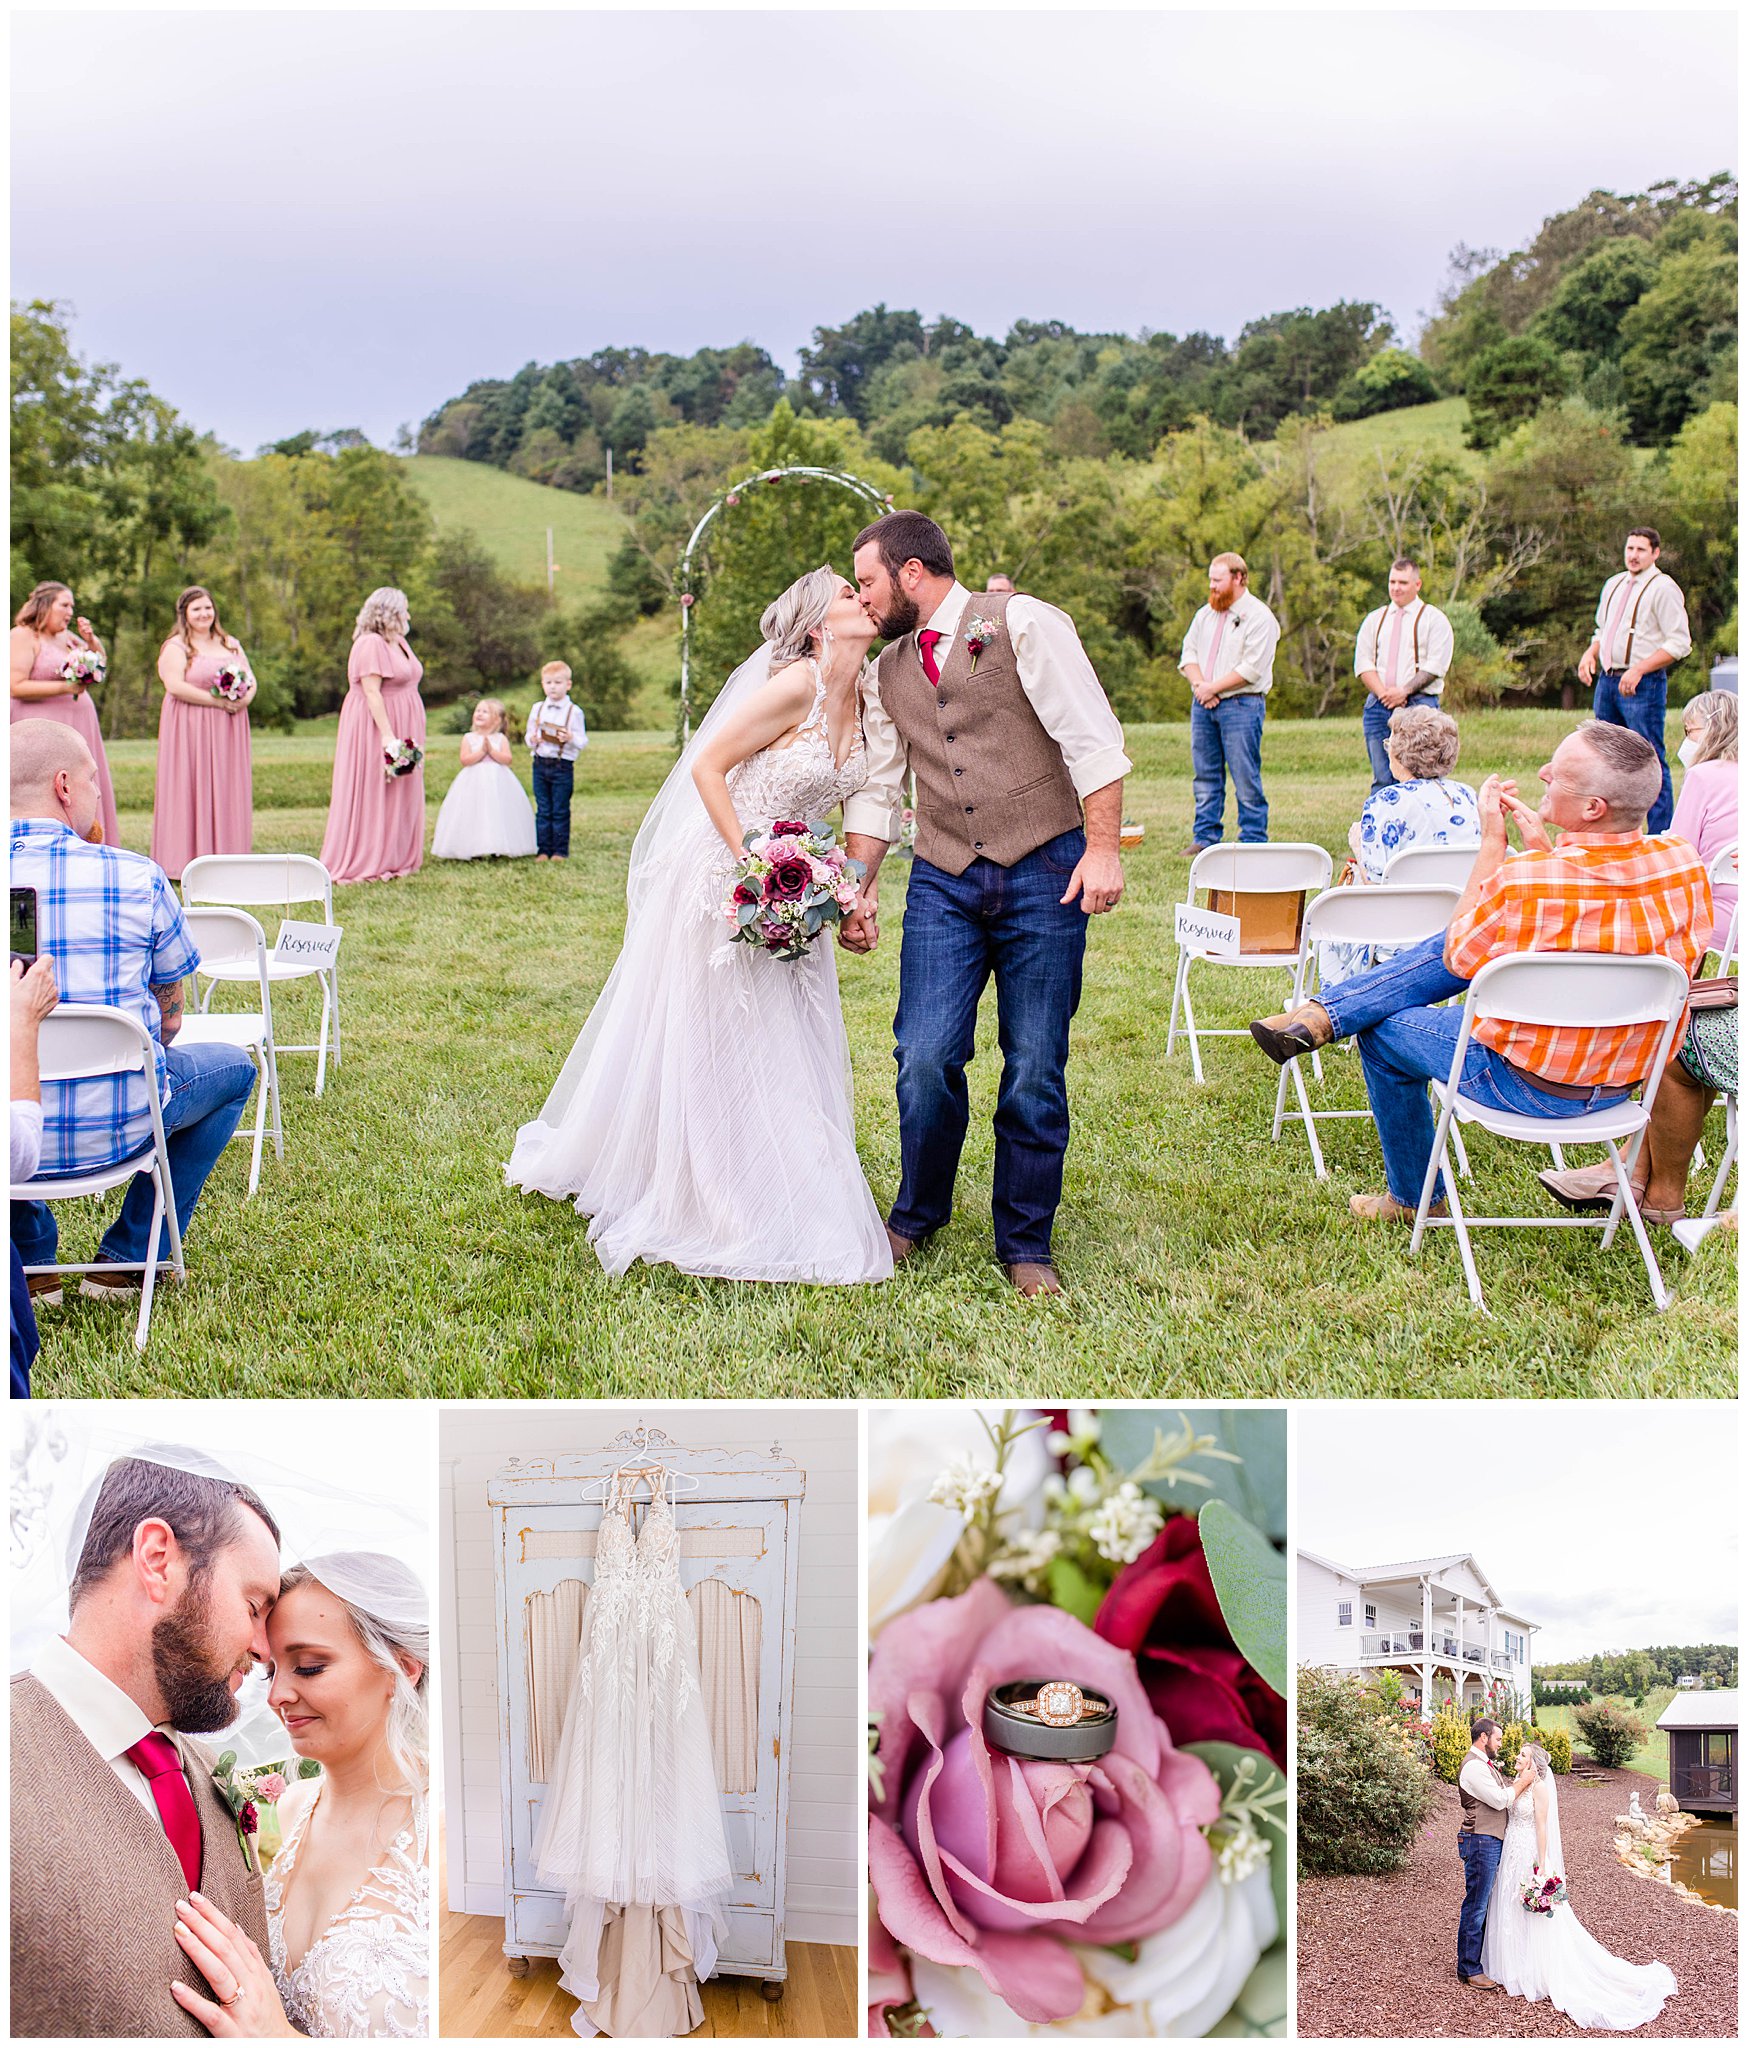 Fall wedding at the Ridgeview Venue in Asheville NC | Tracy Waldrop Photography